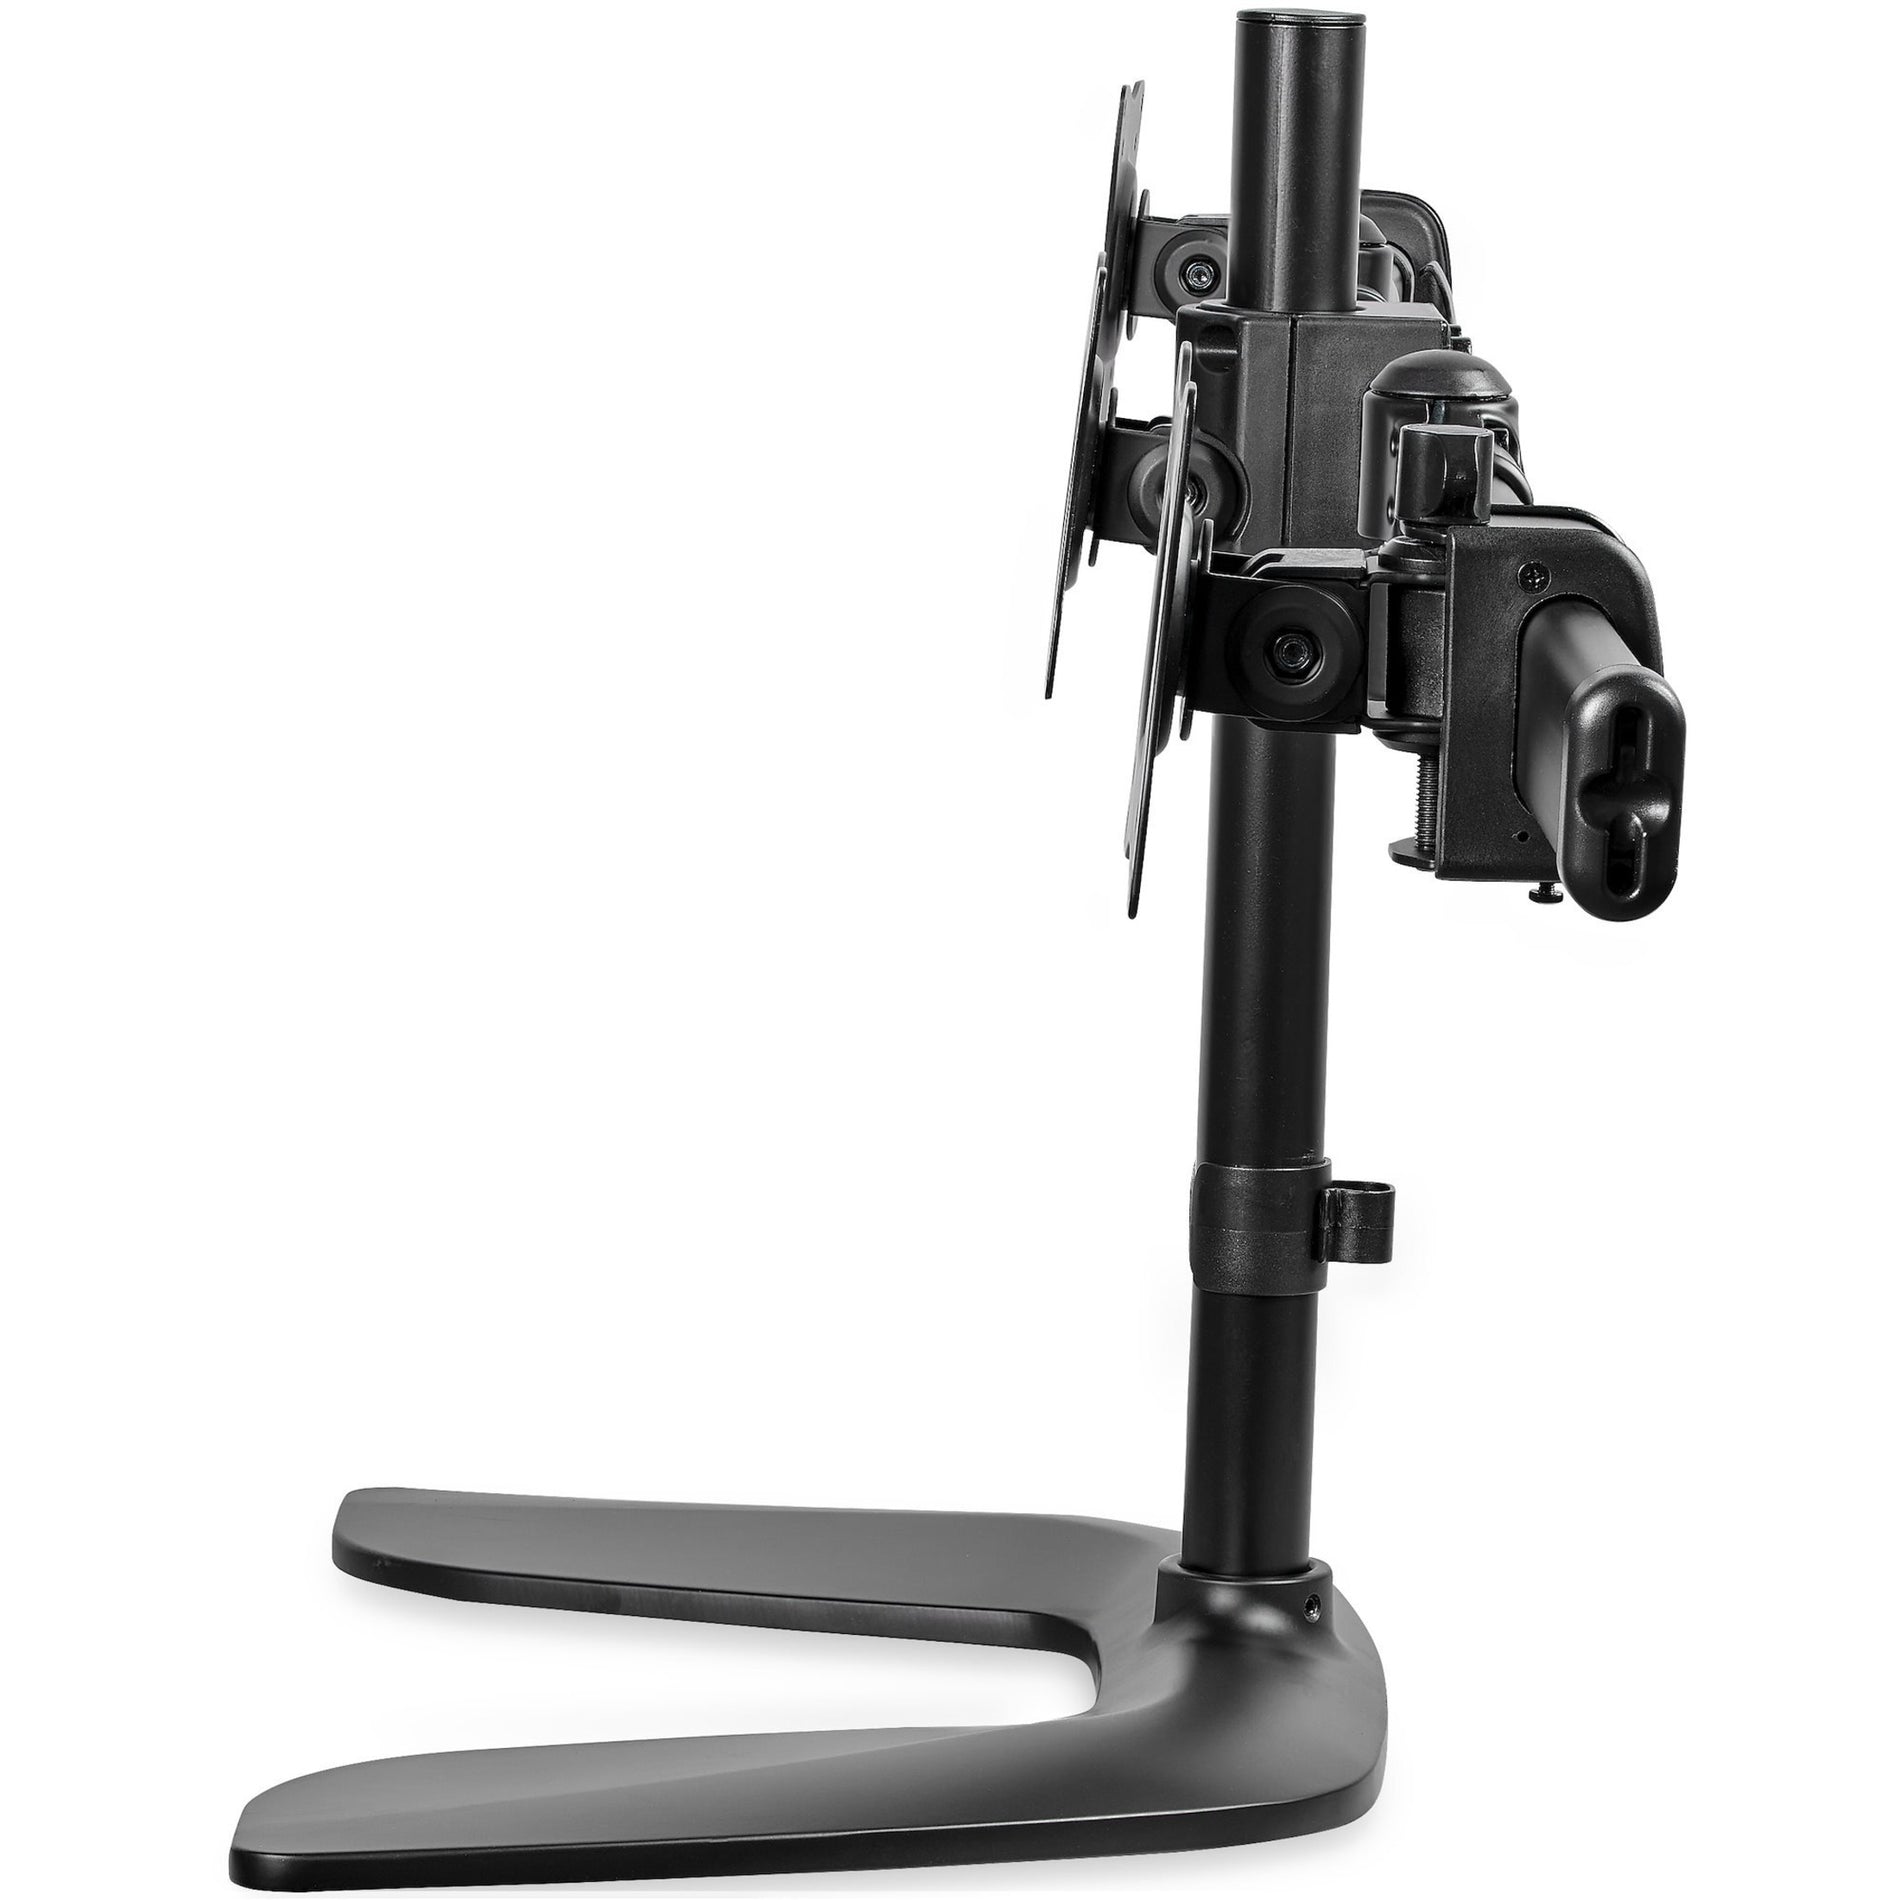 StarTech.com ARMBARTRIO2 Triple-Monitor Desktop Stand - Articulating, 360° Rotation, Sturdy, Scratch Resistant, Heavy Duty, Ergonomic, Cable Management